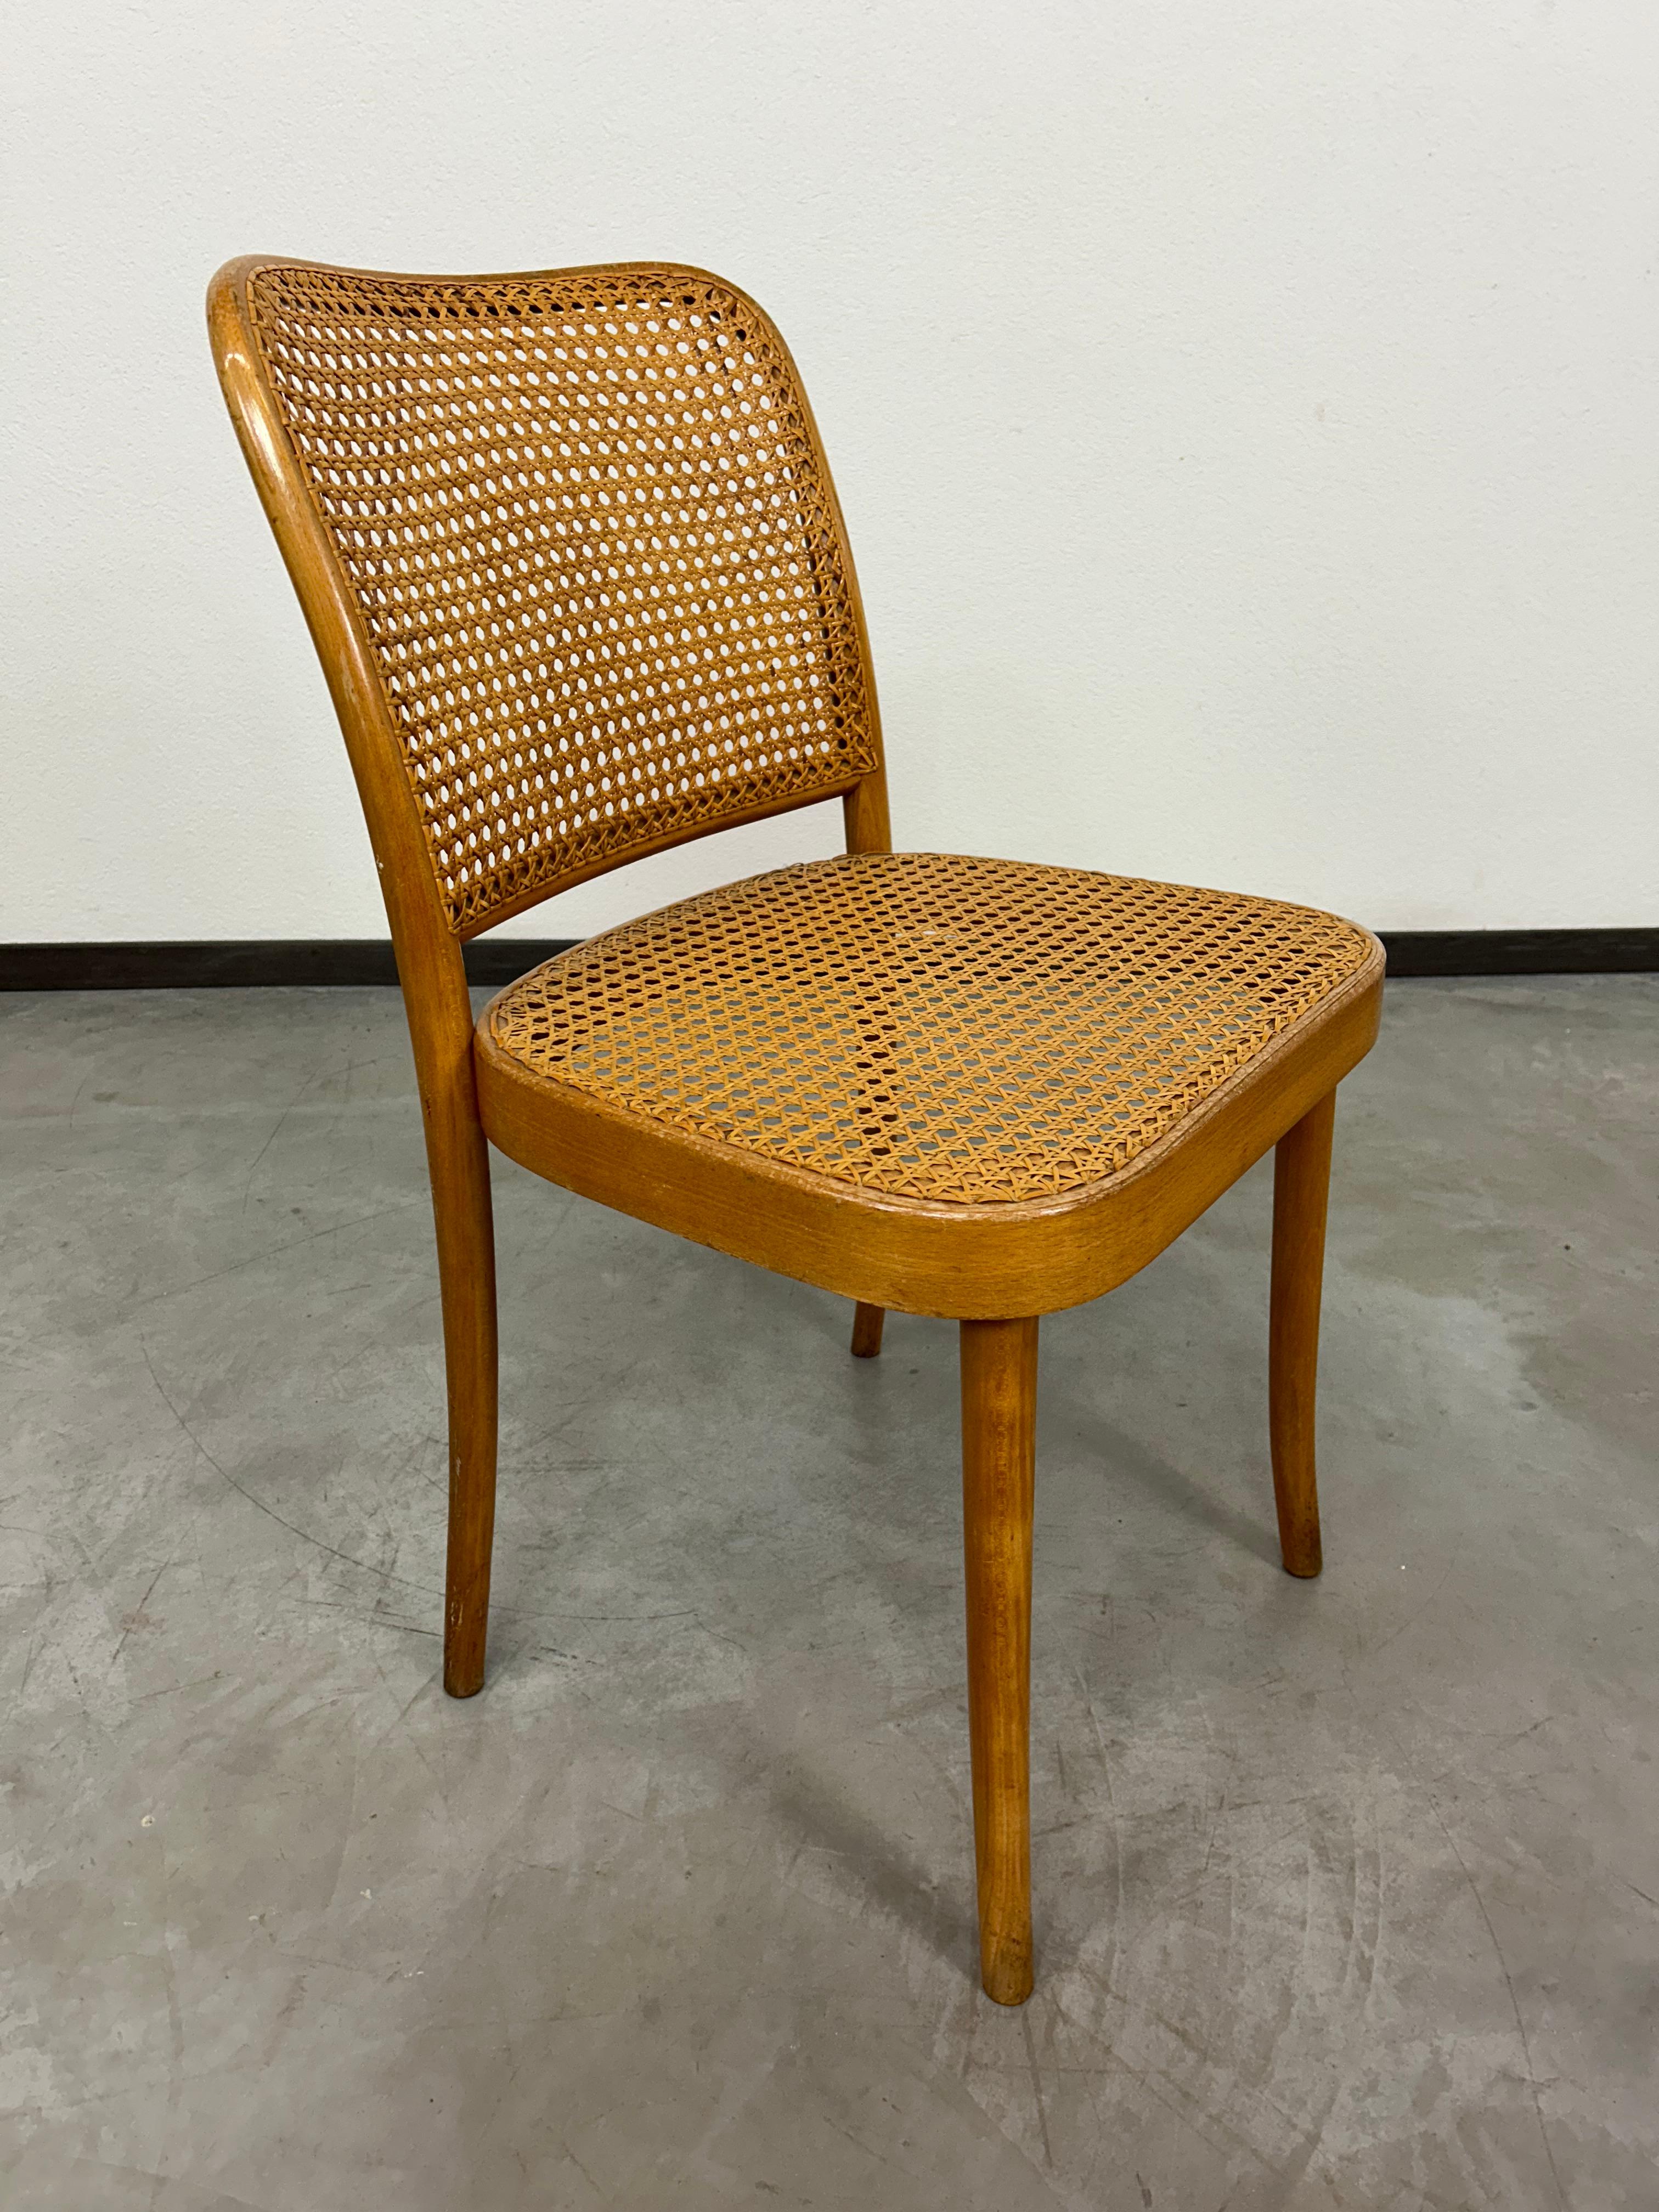 Bauhaus chair no.811 by Josef Hoffmann for Thonet in very nice original condition with signs of use.